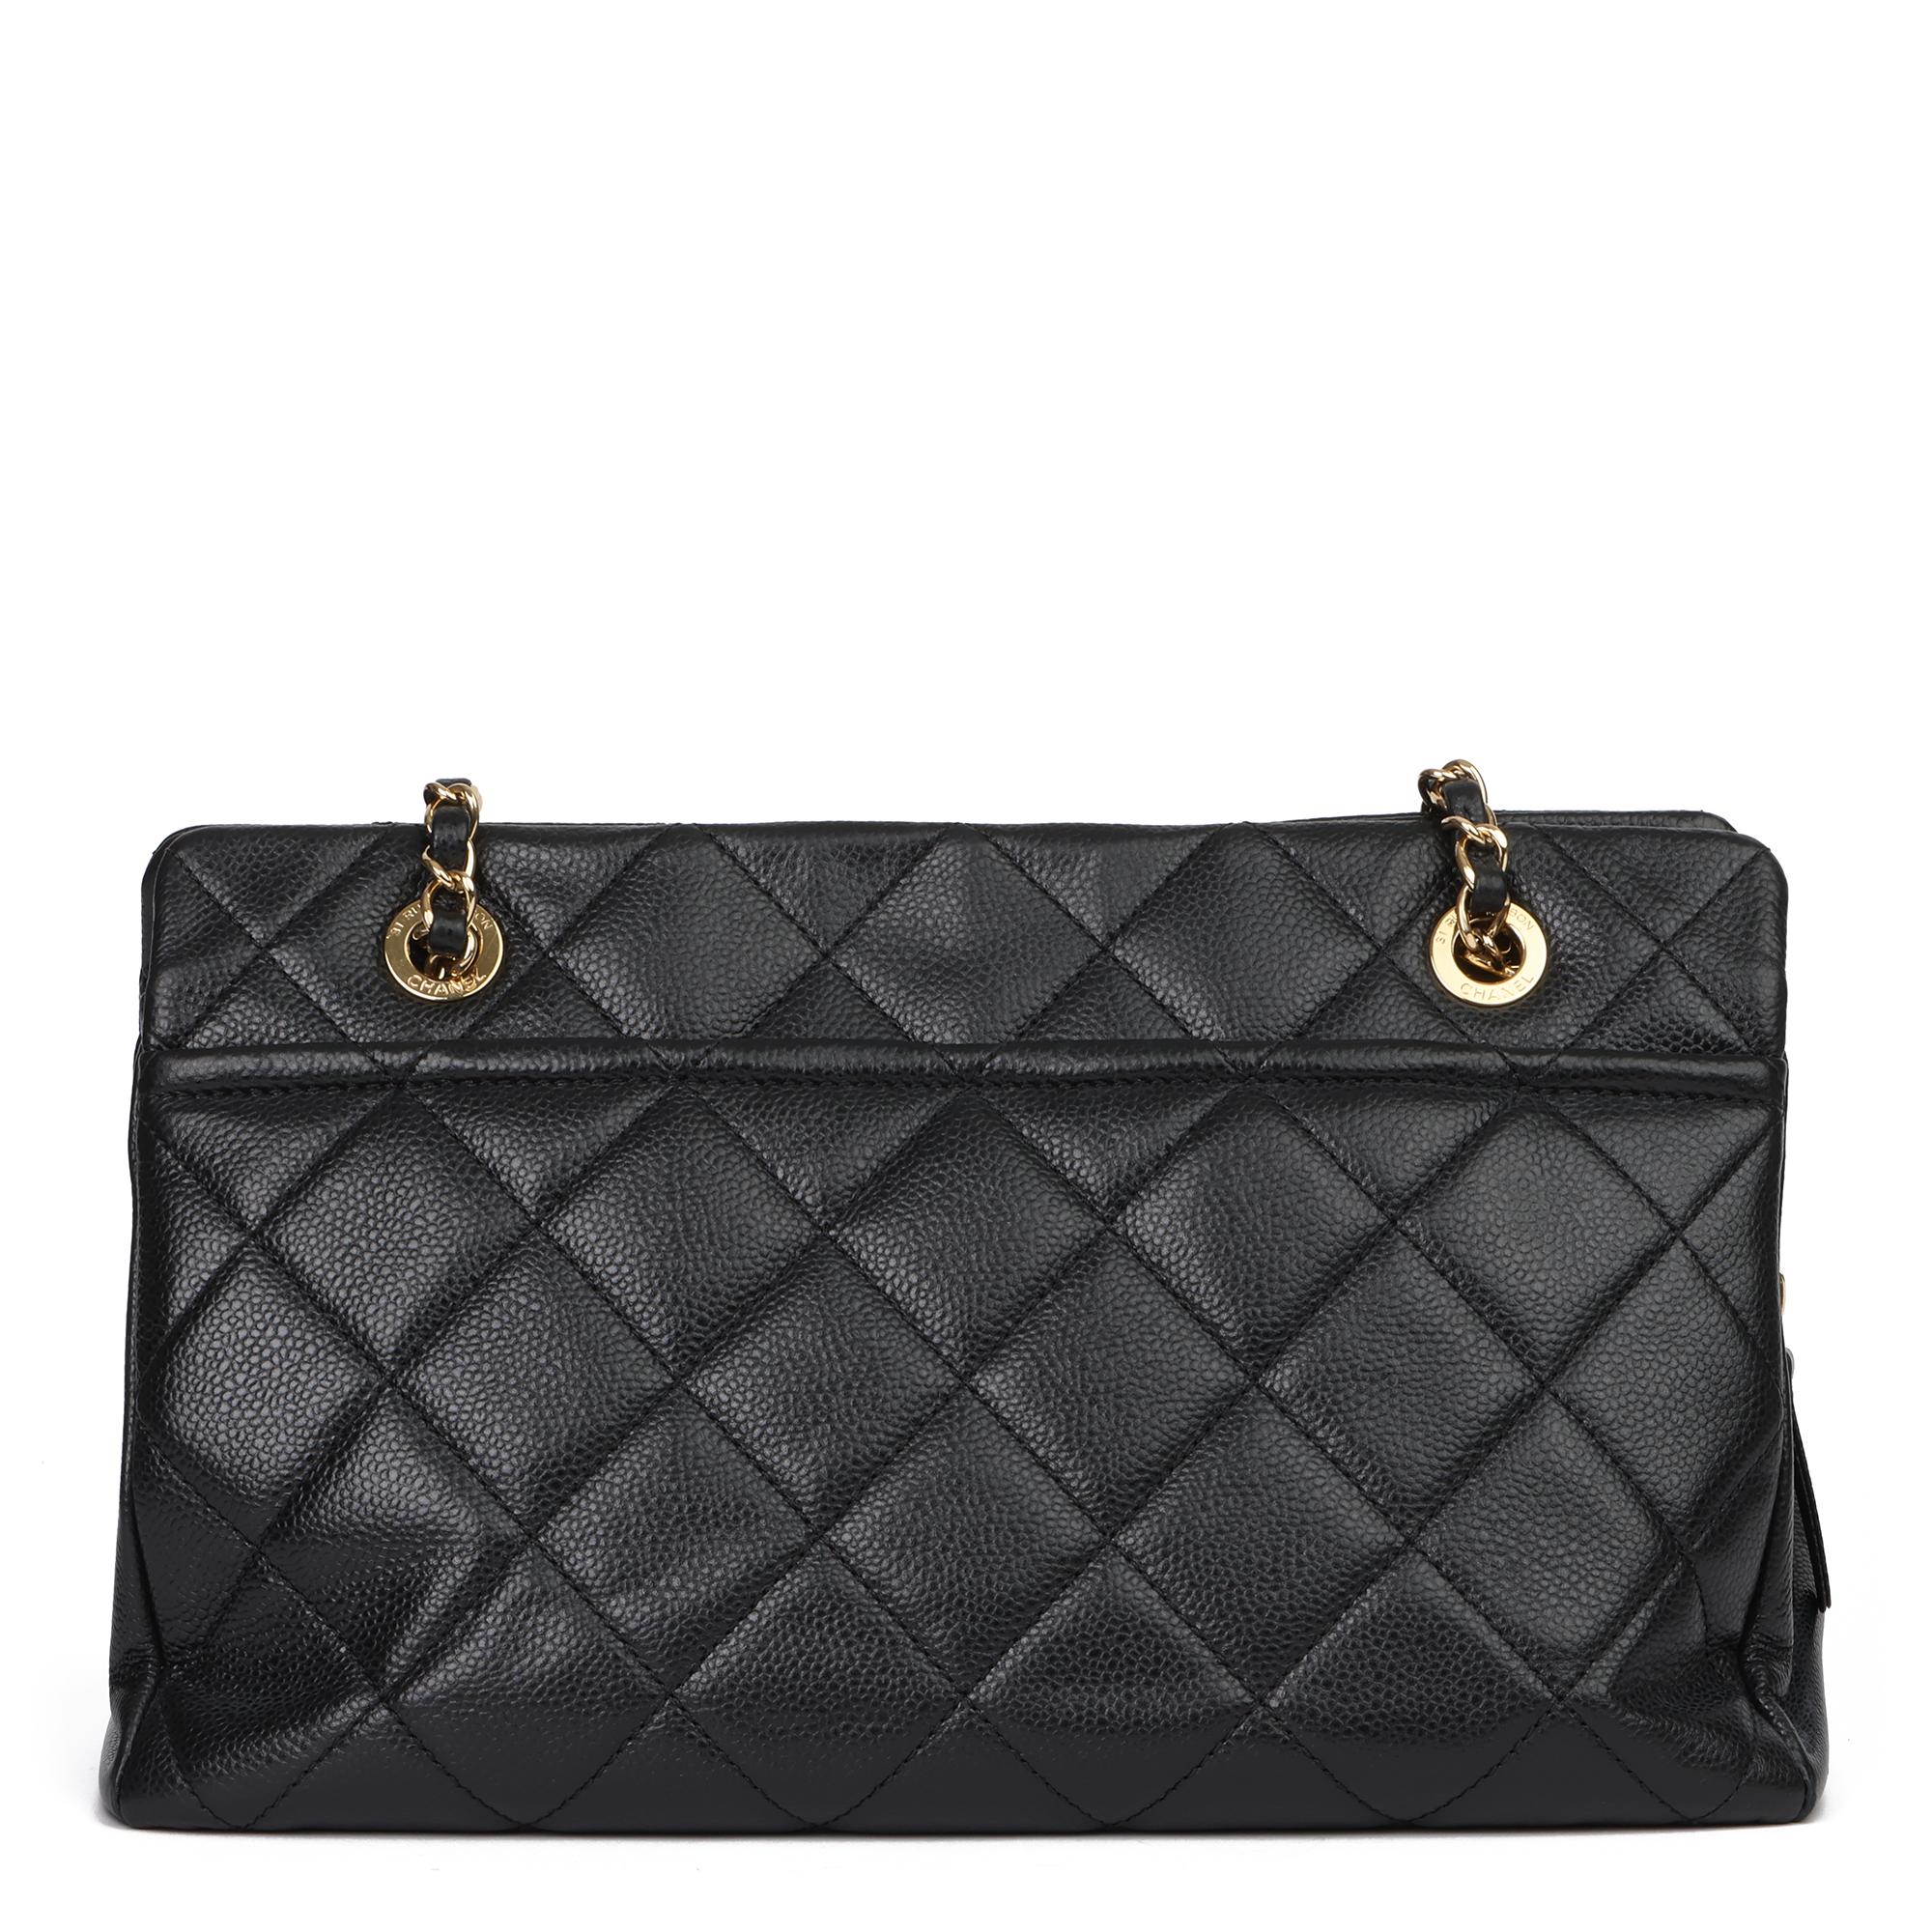 2013 Chanel Black Quilted Caviar Leather Petite Shopping Tote PST 1